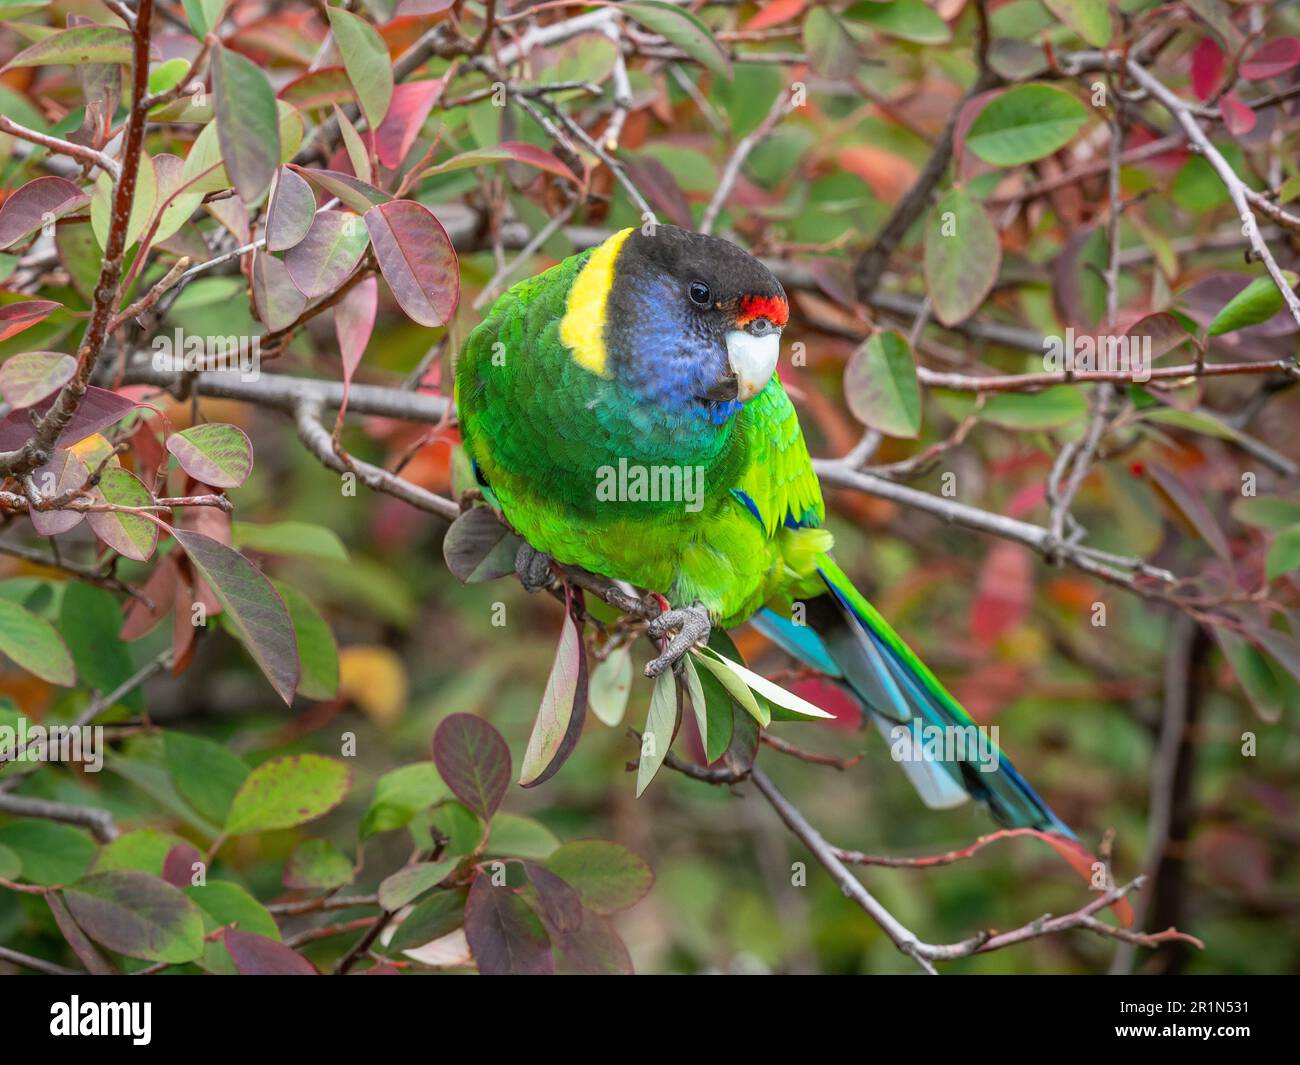 An Australian Ringneck of the western race, known as the Twenty-eight Parrot, photographed in a forest in southwestern Australia. Stock Photo